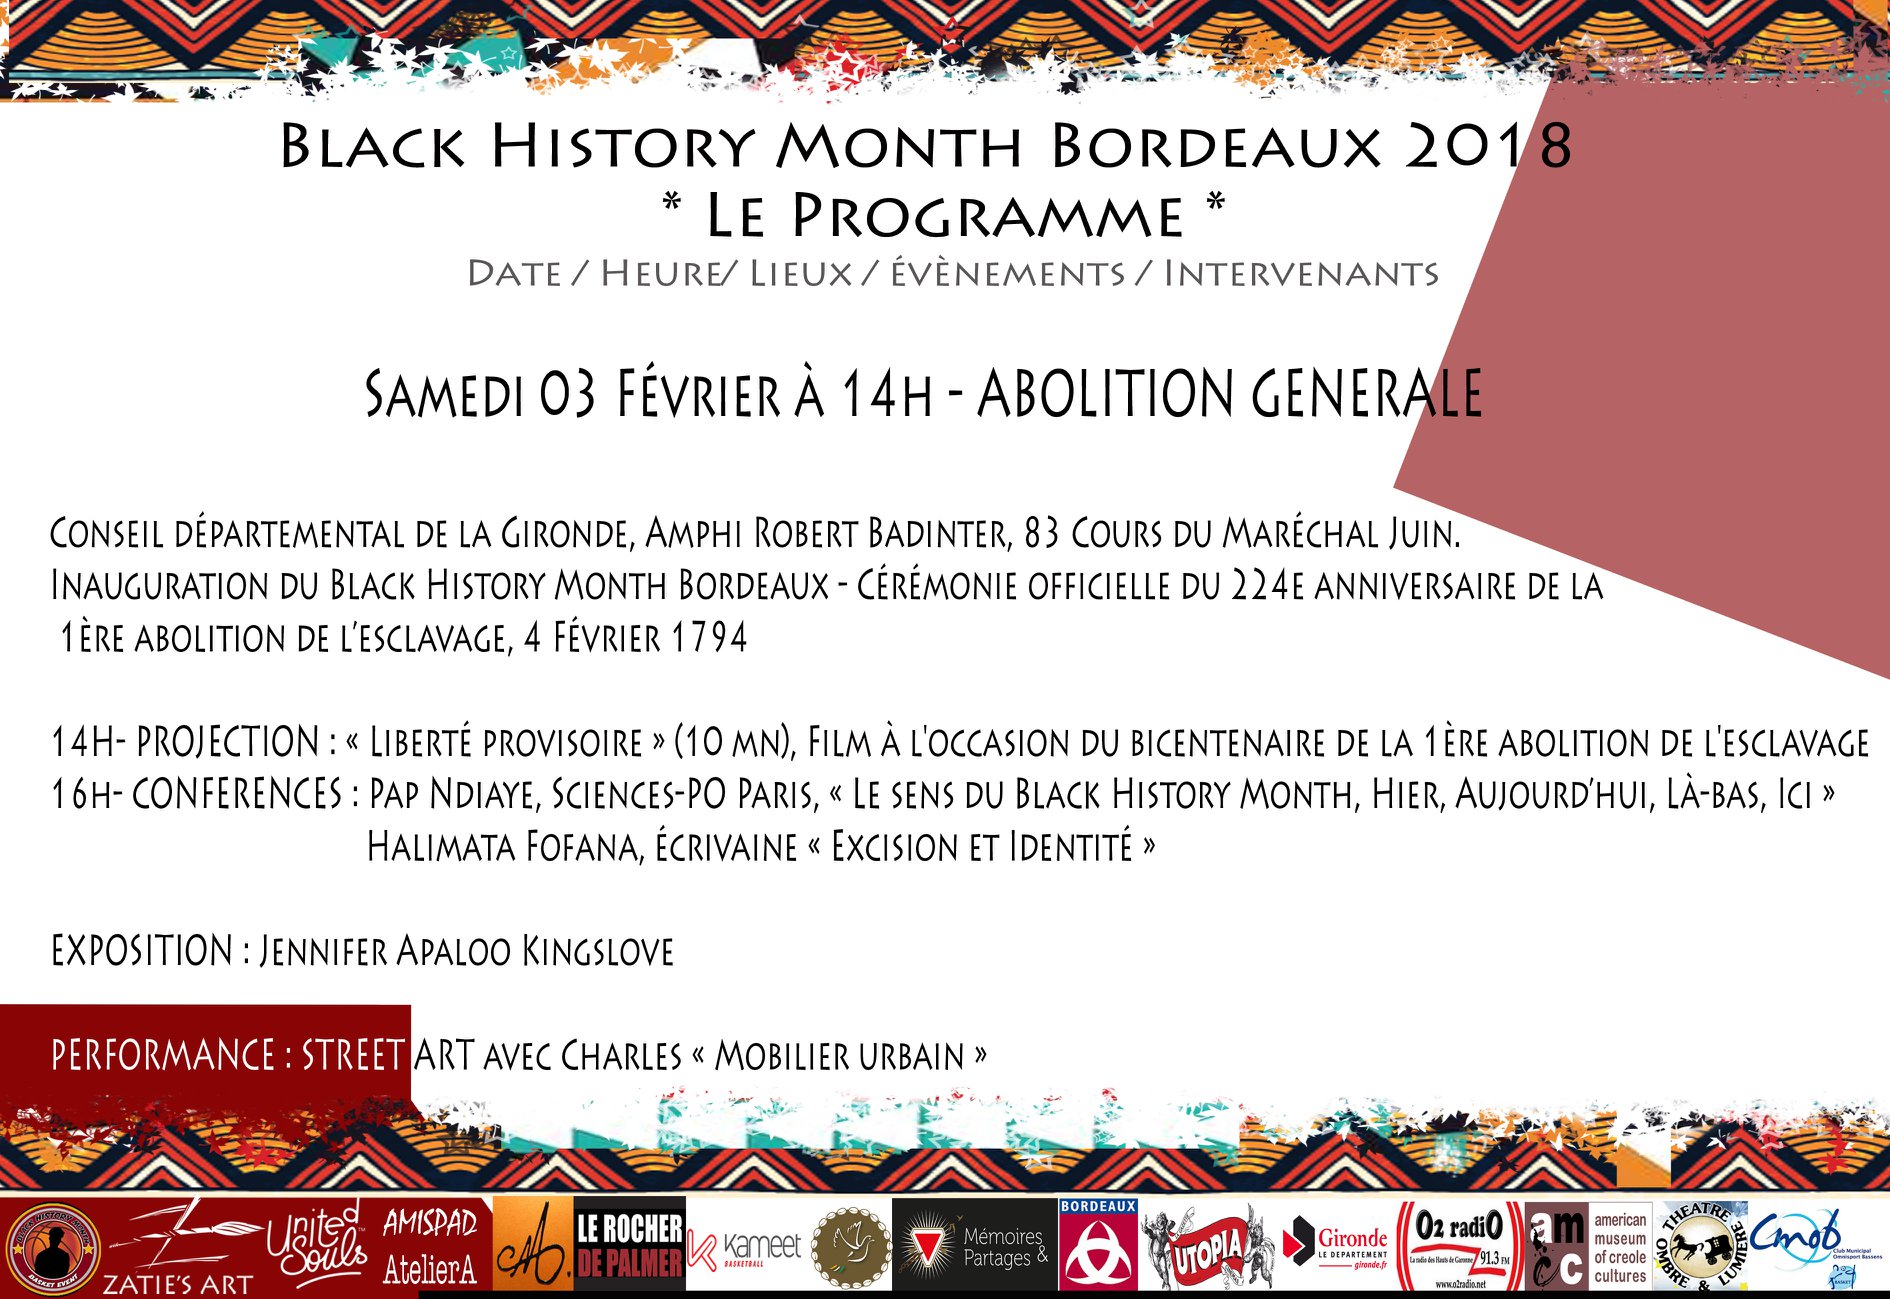 February 3 events - Black History Month Bordeaux